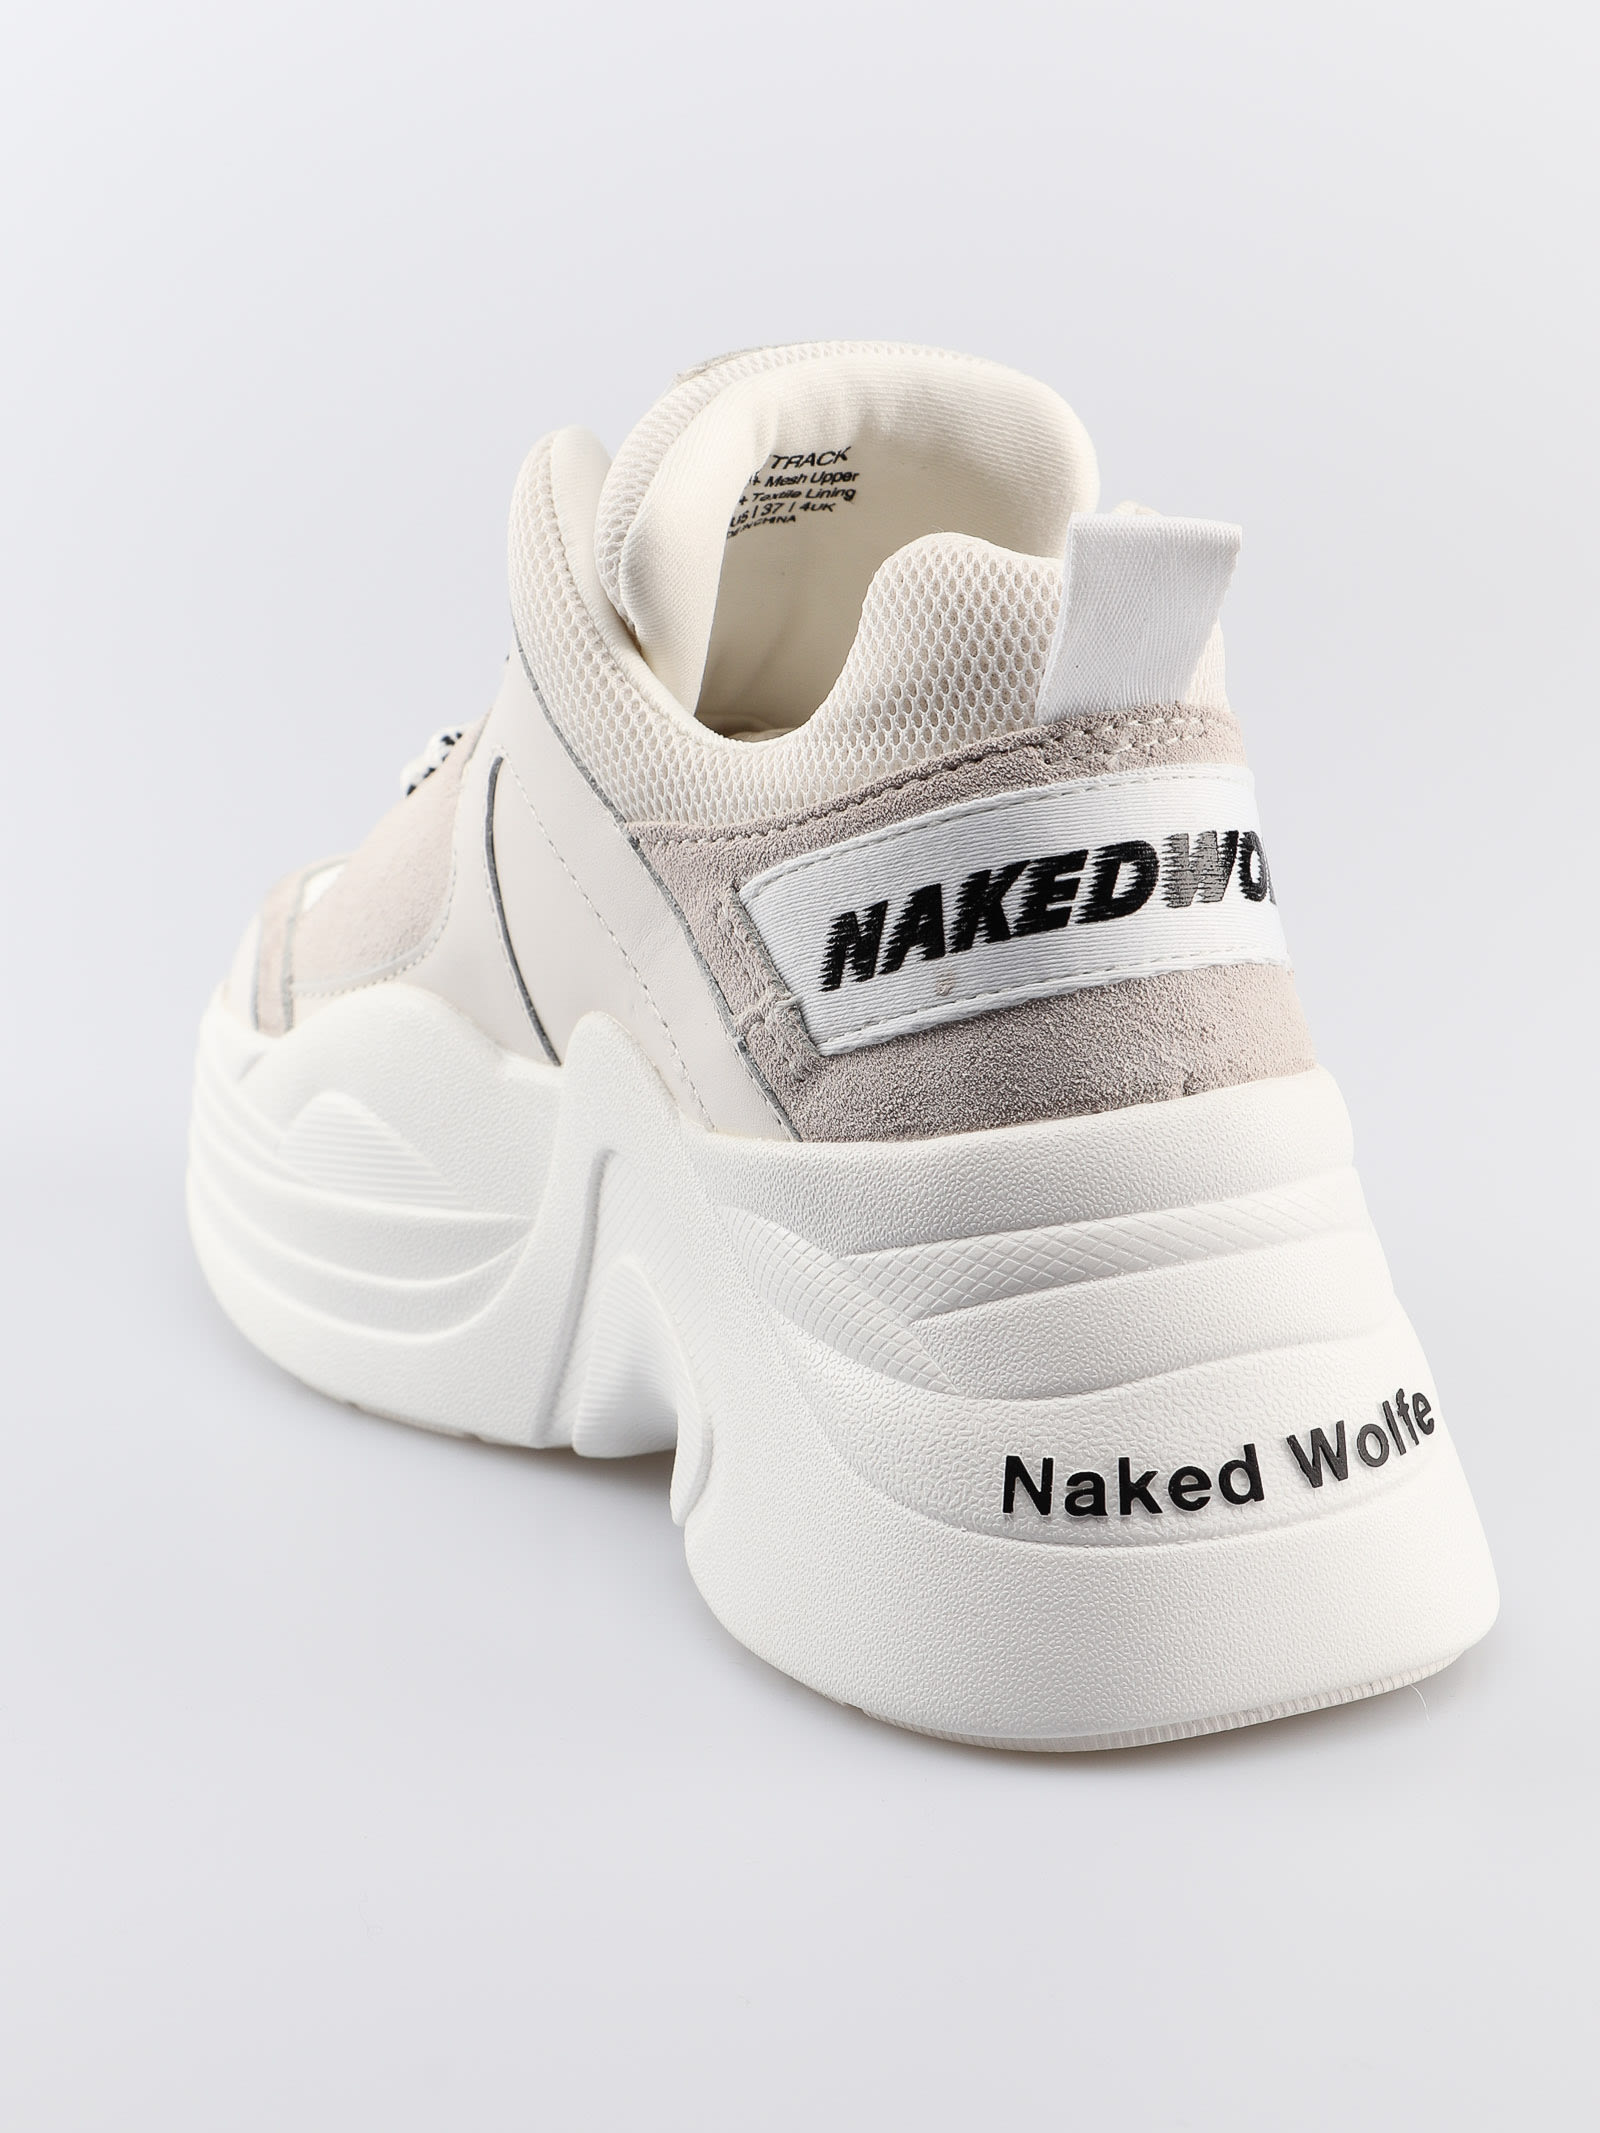 Naked Wolfe Naked Wolfe New Track Sneakers - White - 10921983 | italist